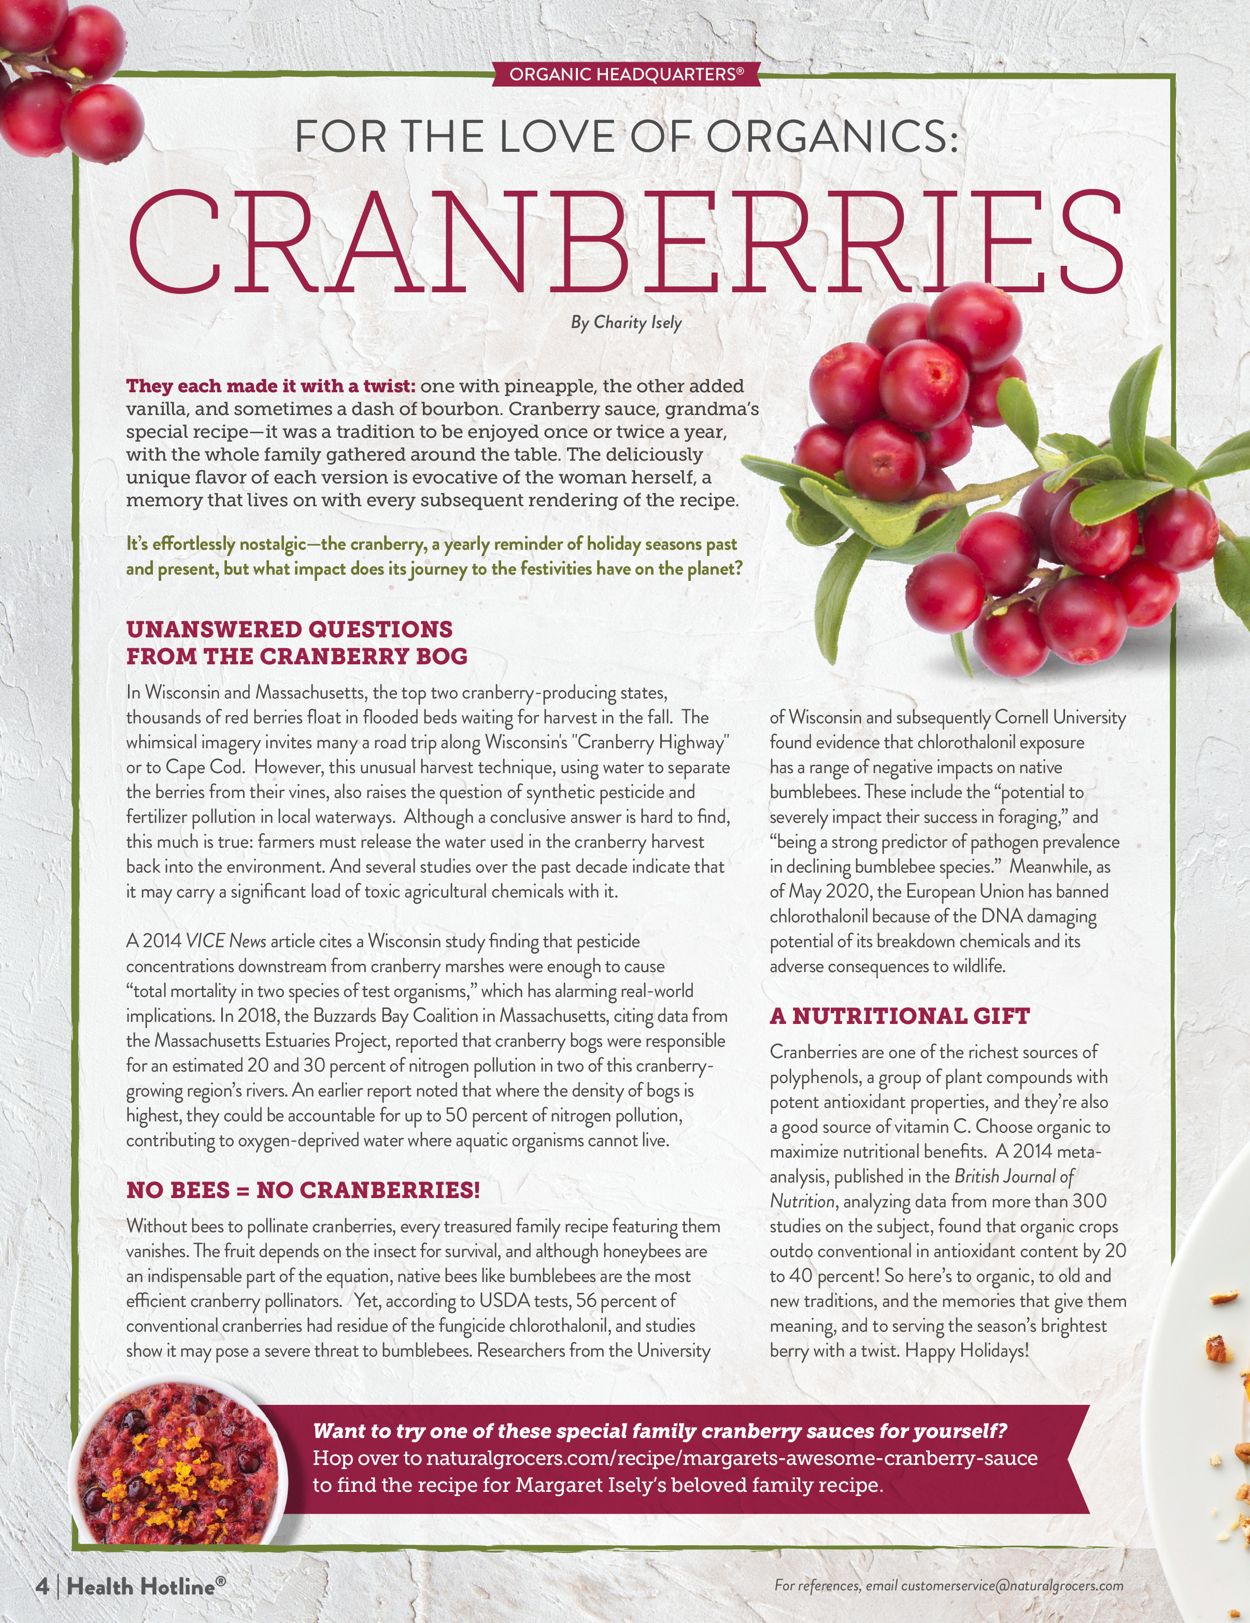 Catalogue Natural Grocers THANKSGIVING 2021 from 10/29/2021